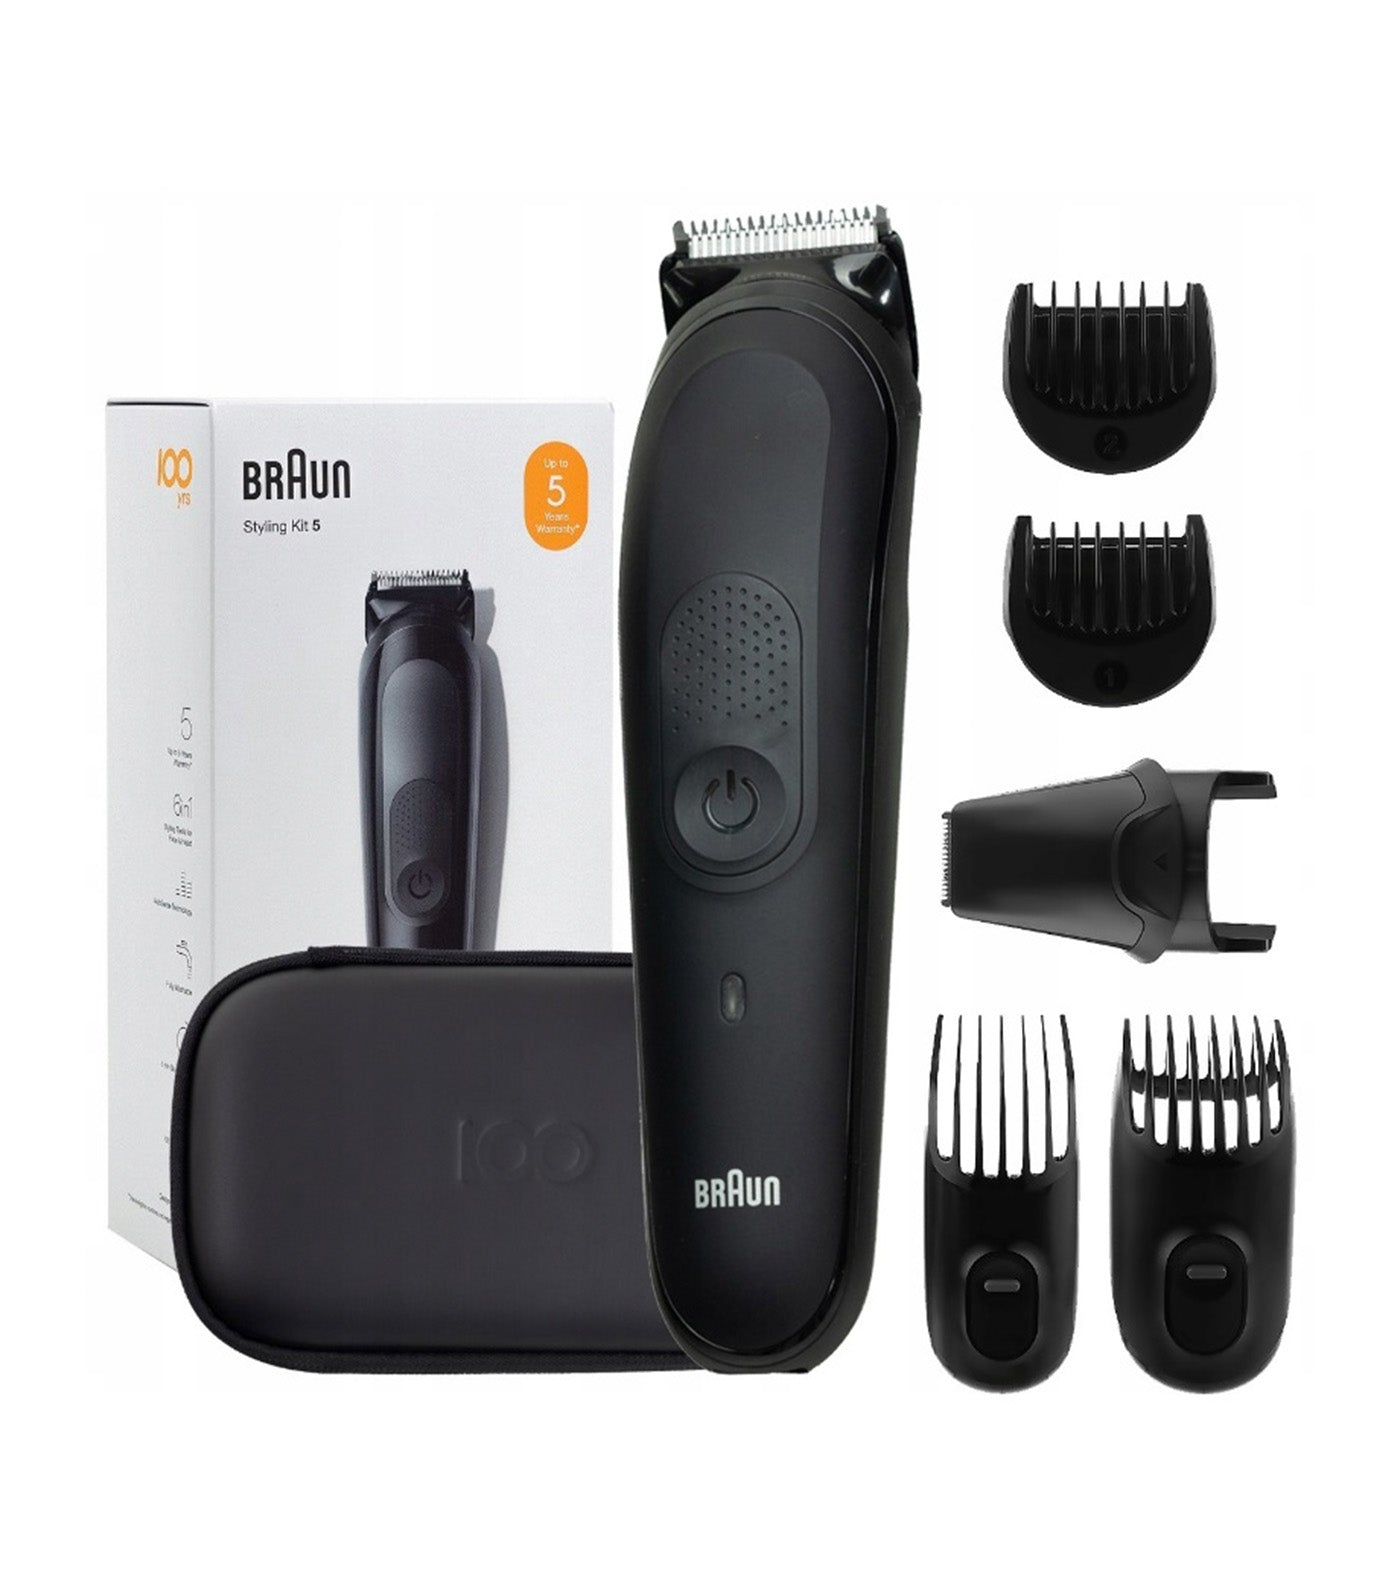 Face Black Limited with Years 6-In-1 Head 100 Precise Edition Travel Styling Kit Case For Braun Styling and